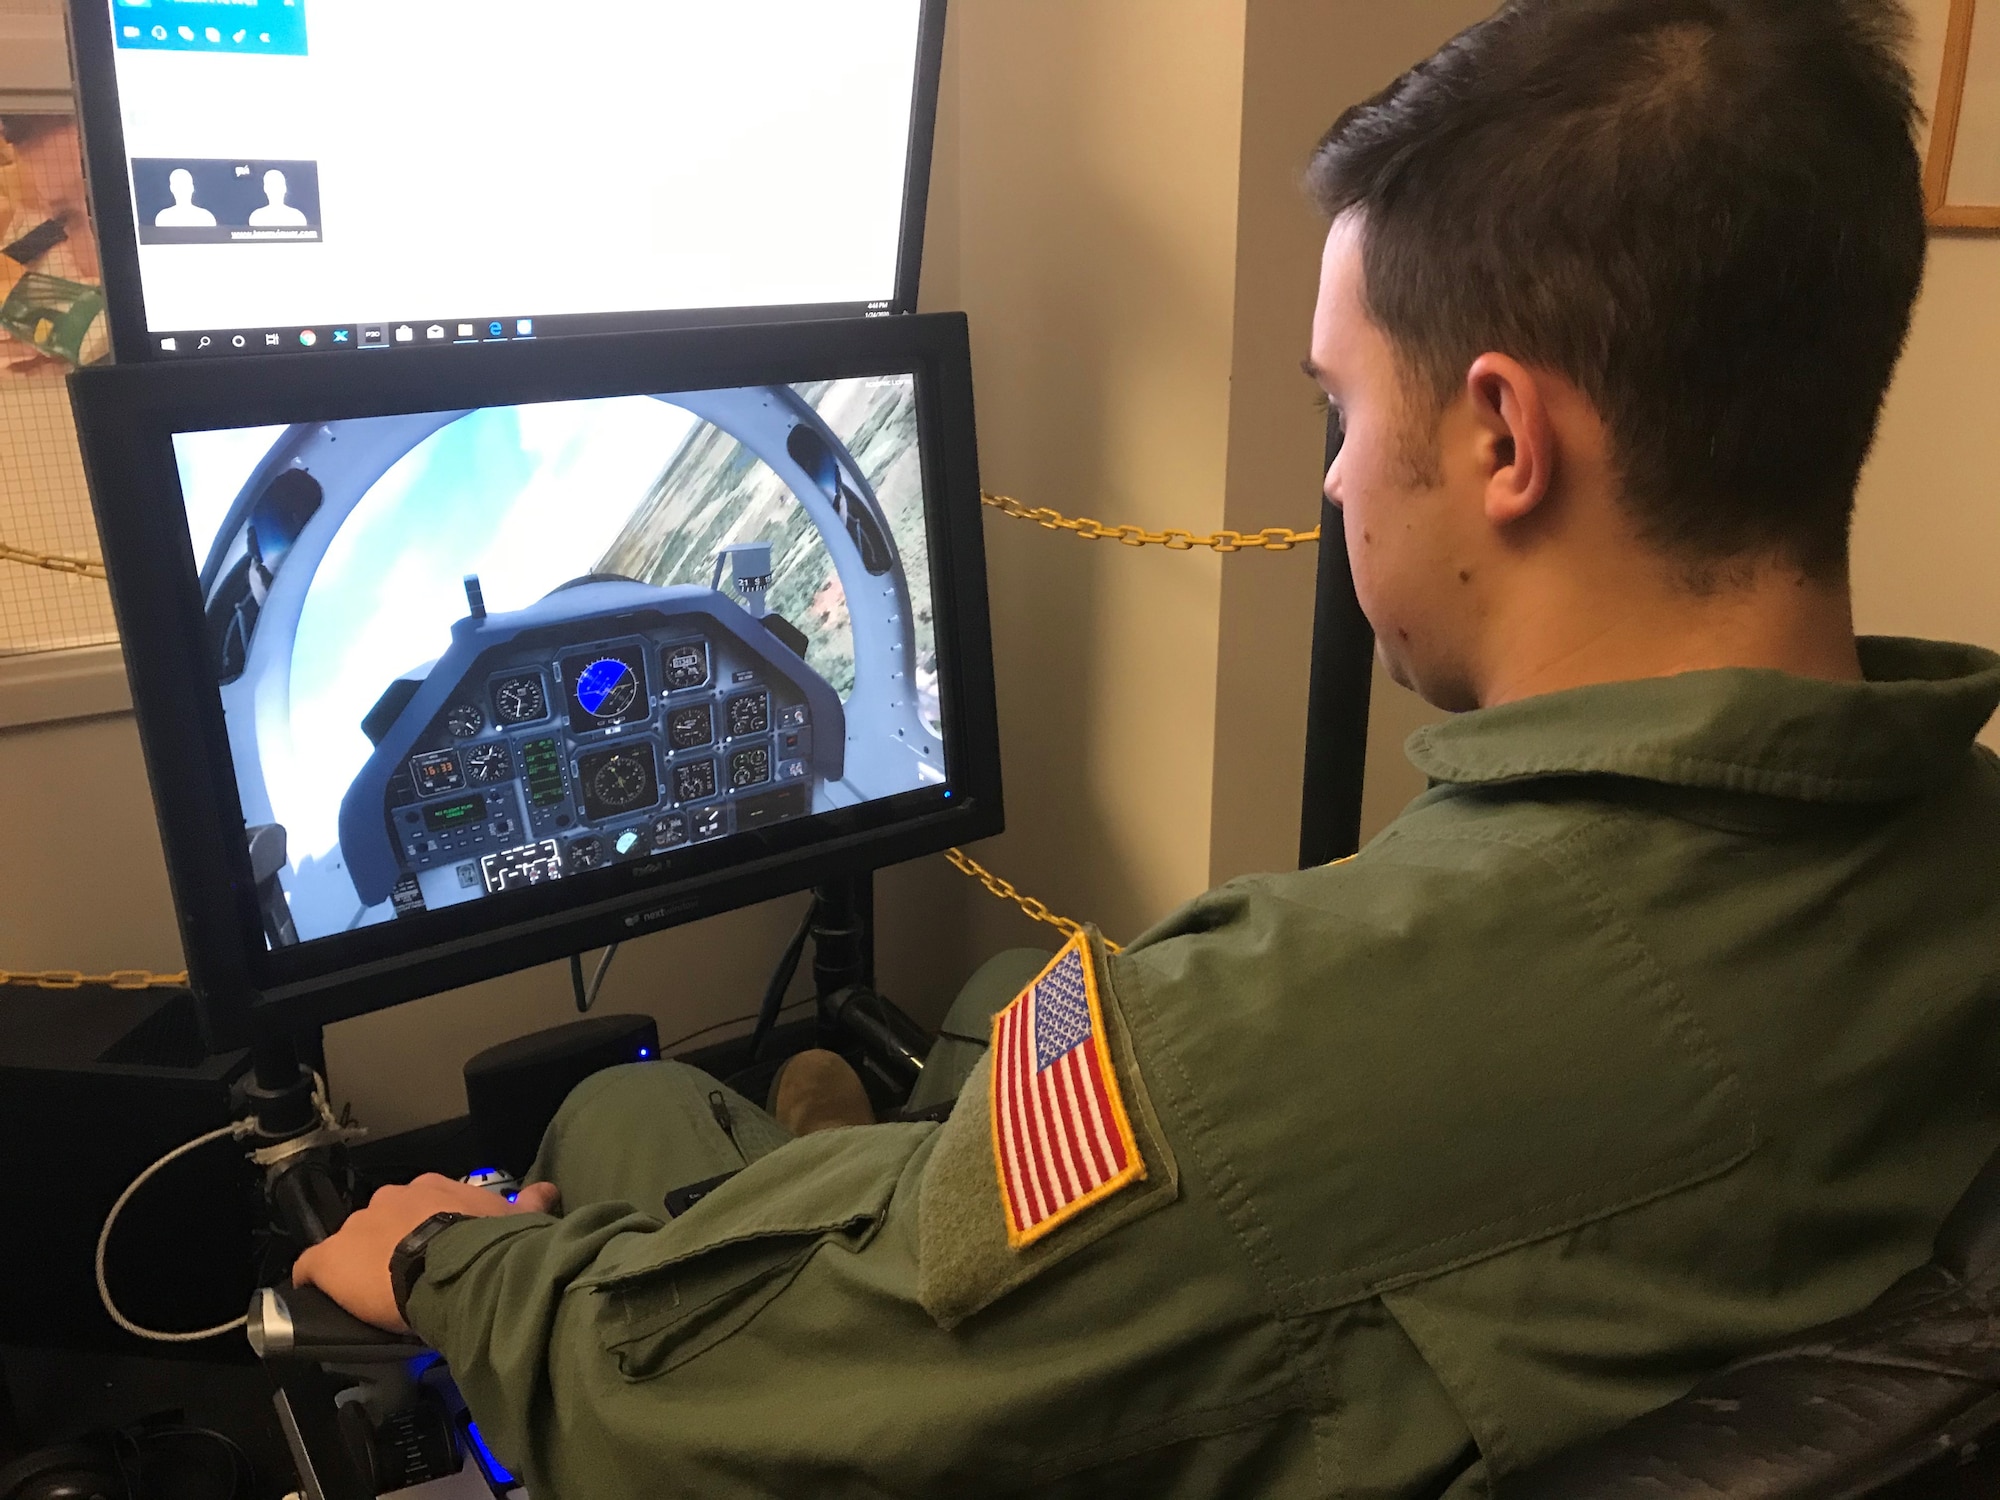 Pilot Training Next helped make Air Force ROTC history while pushing the limits of technology and training during their recent partnership with Clarkson University.